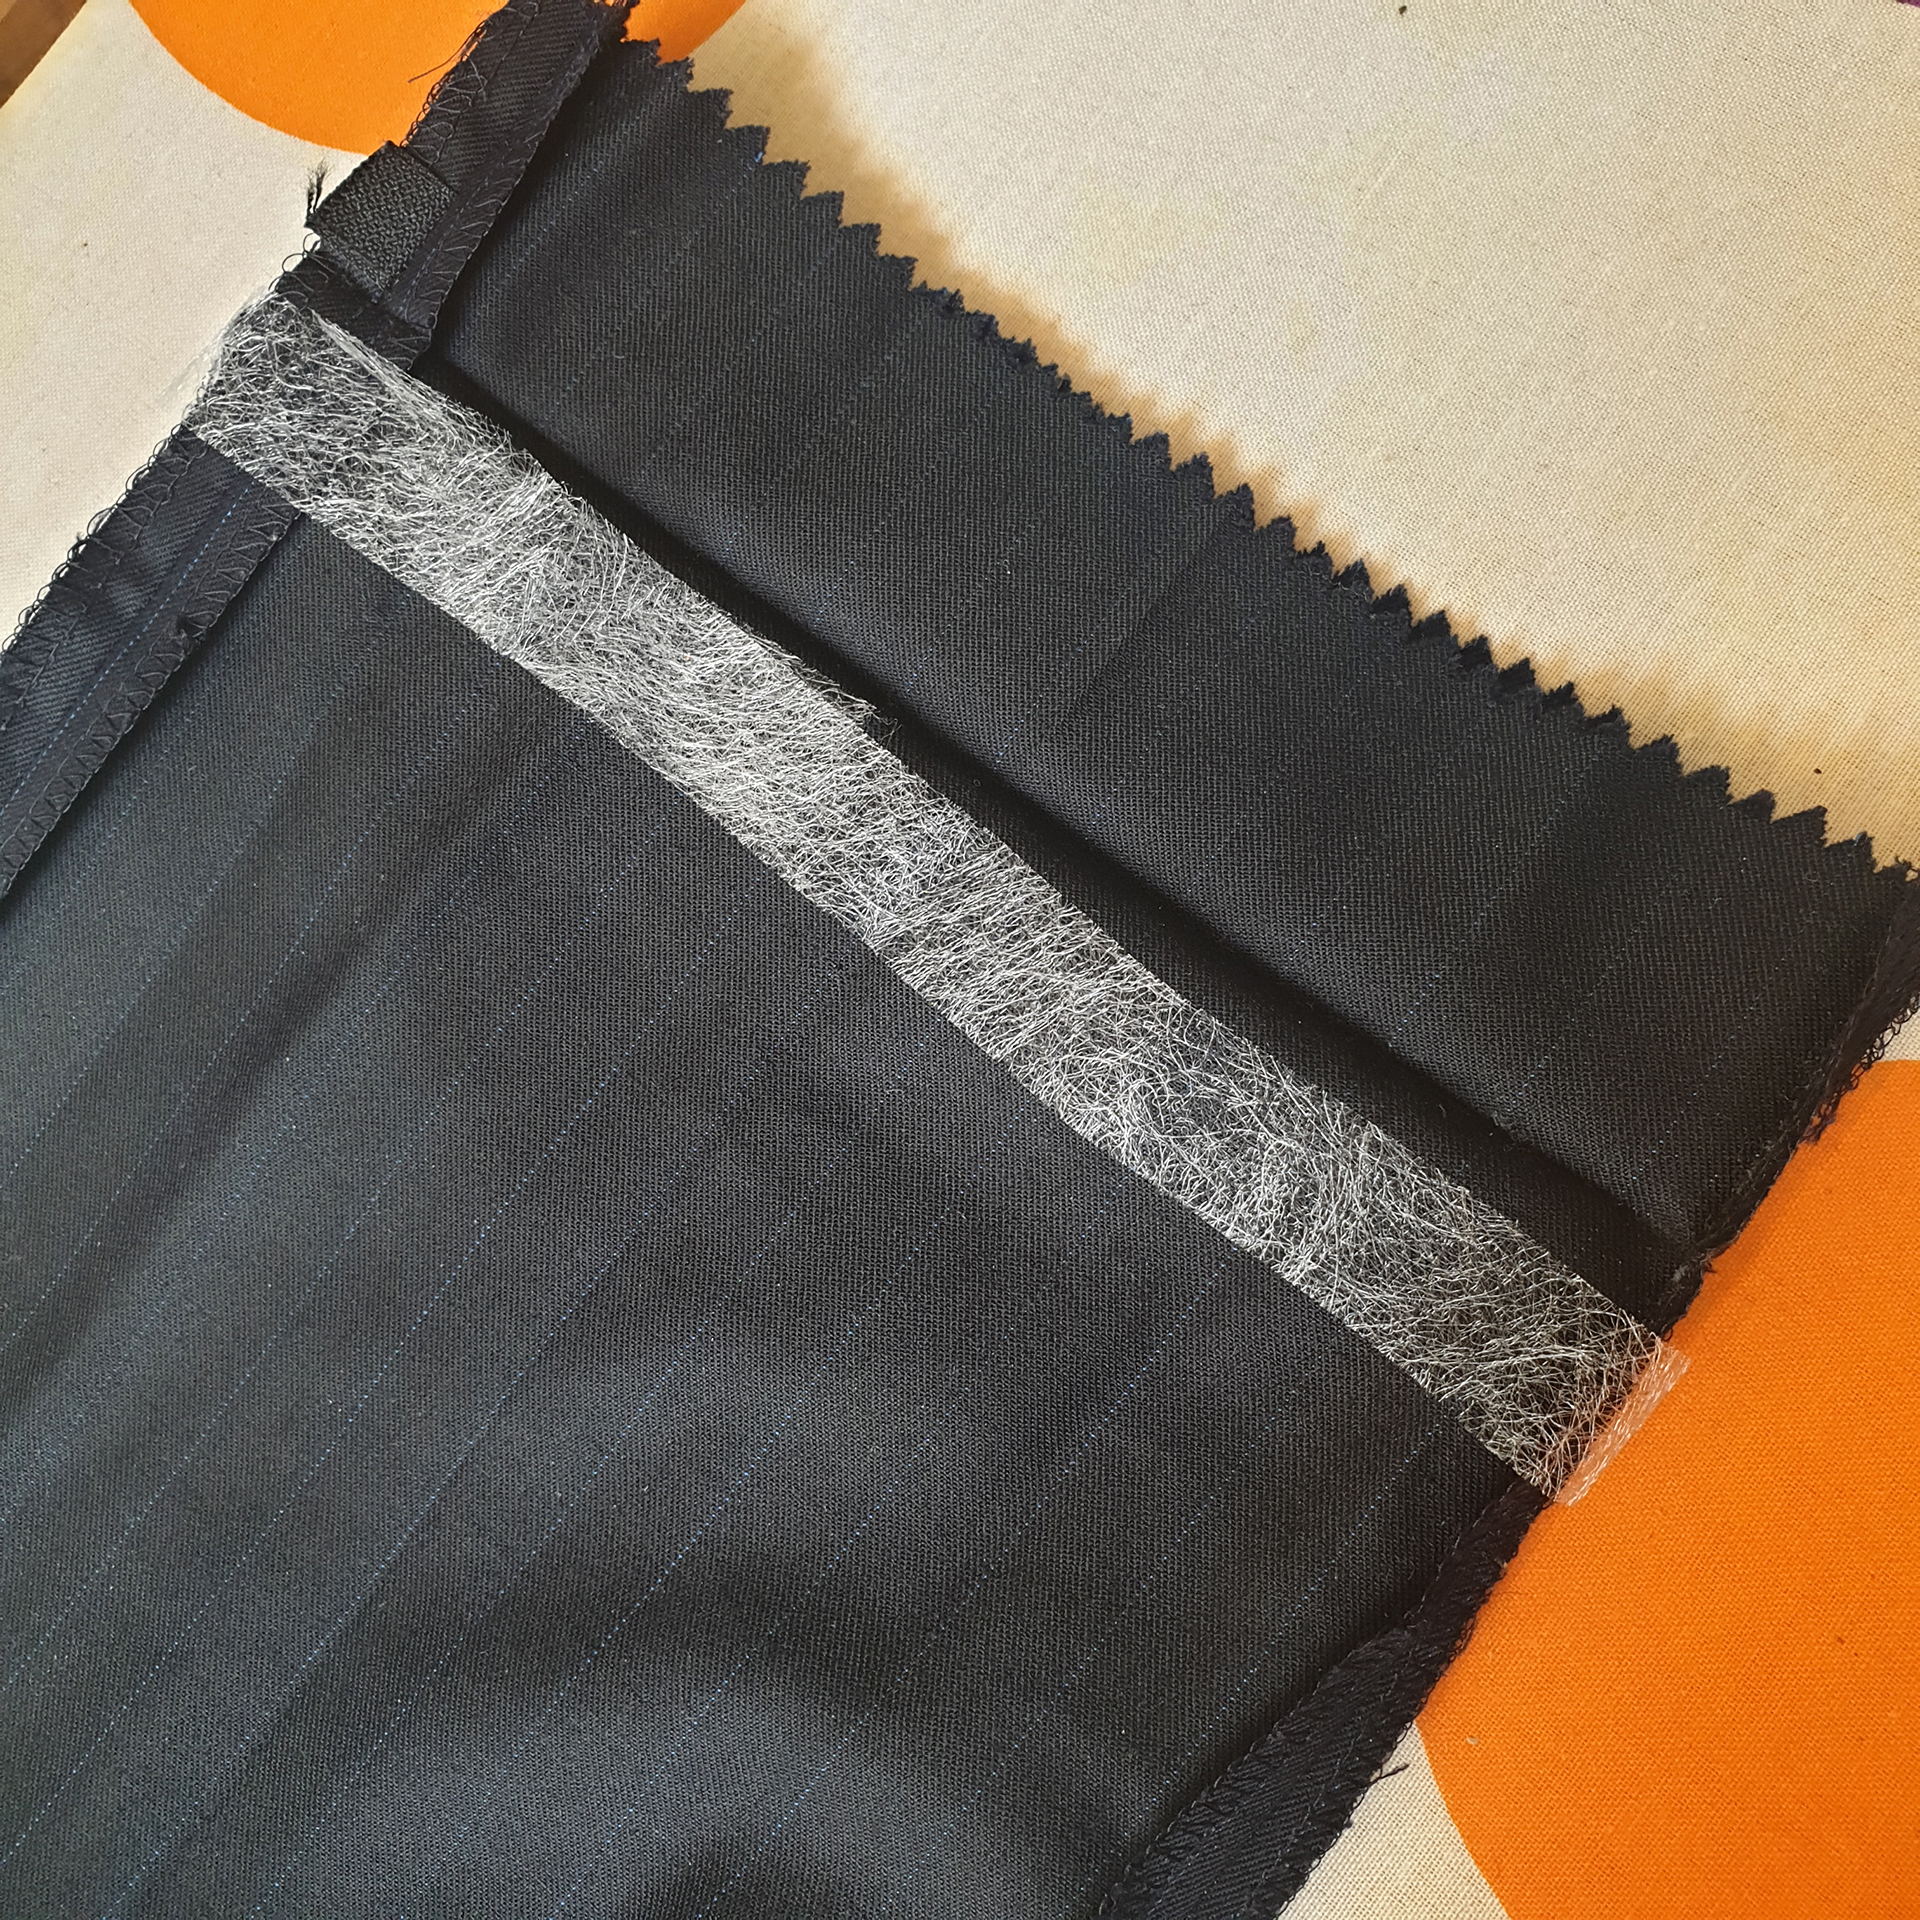 cut the exact amount of fabric tape to hem your suit pants